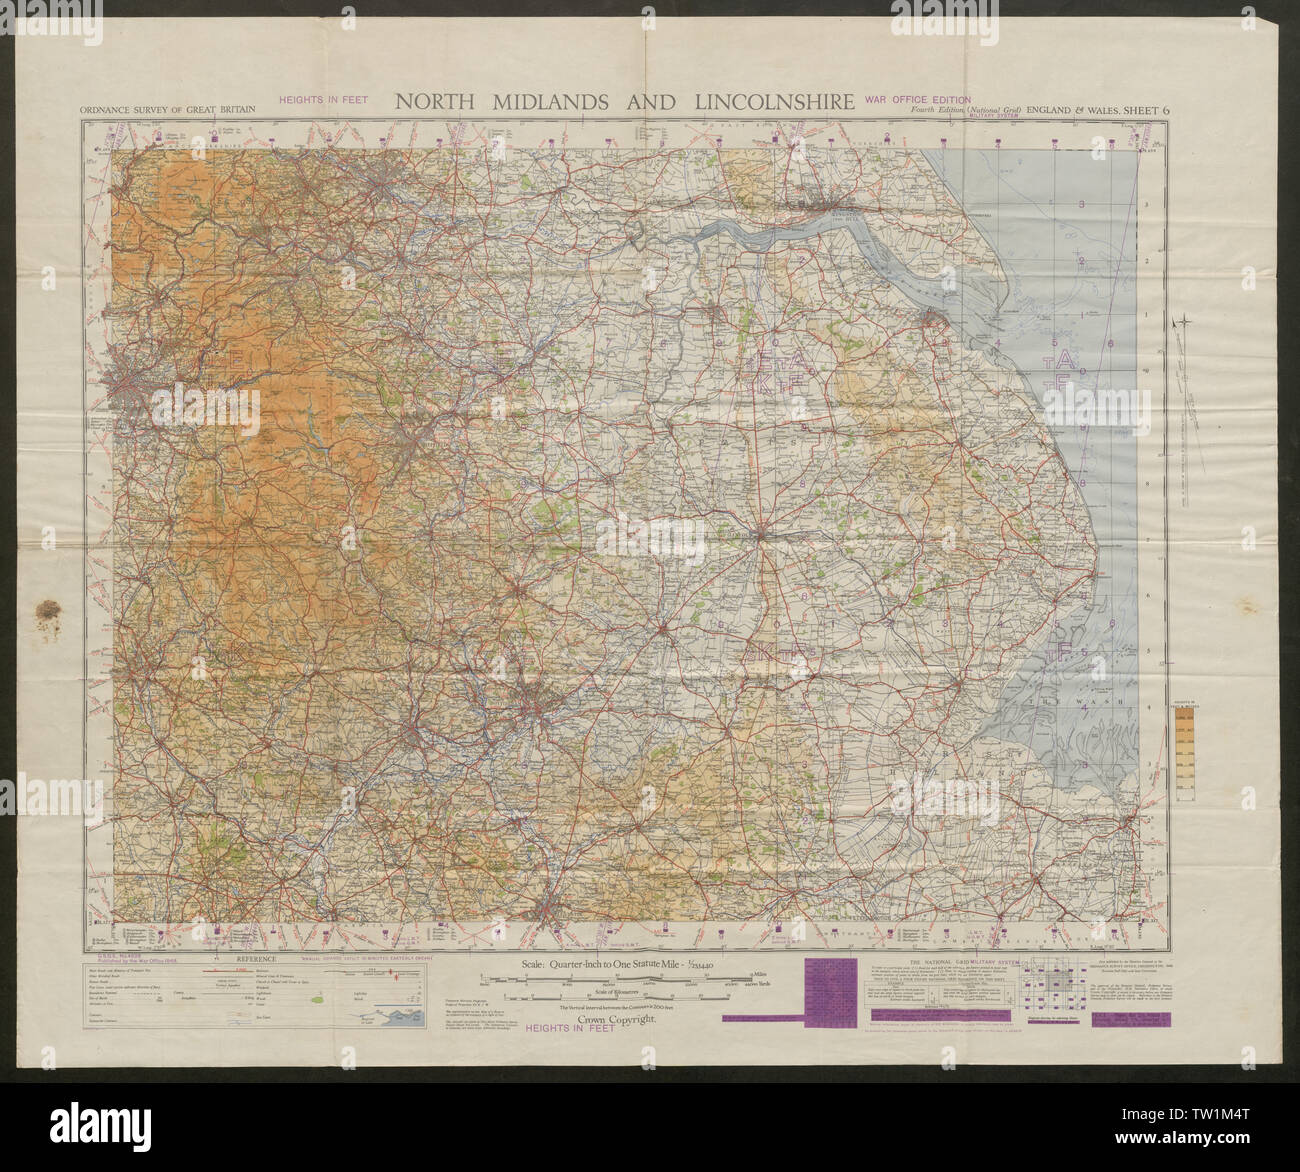 War Office Sheet 6 NORTH MIDLANDS & LINCOLNSHIRE. ORDNANCE SURVEY 1948 old map Stock Photo